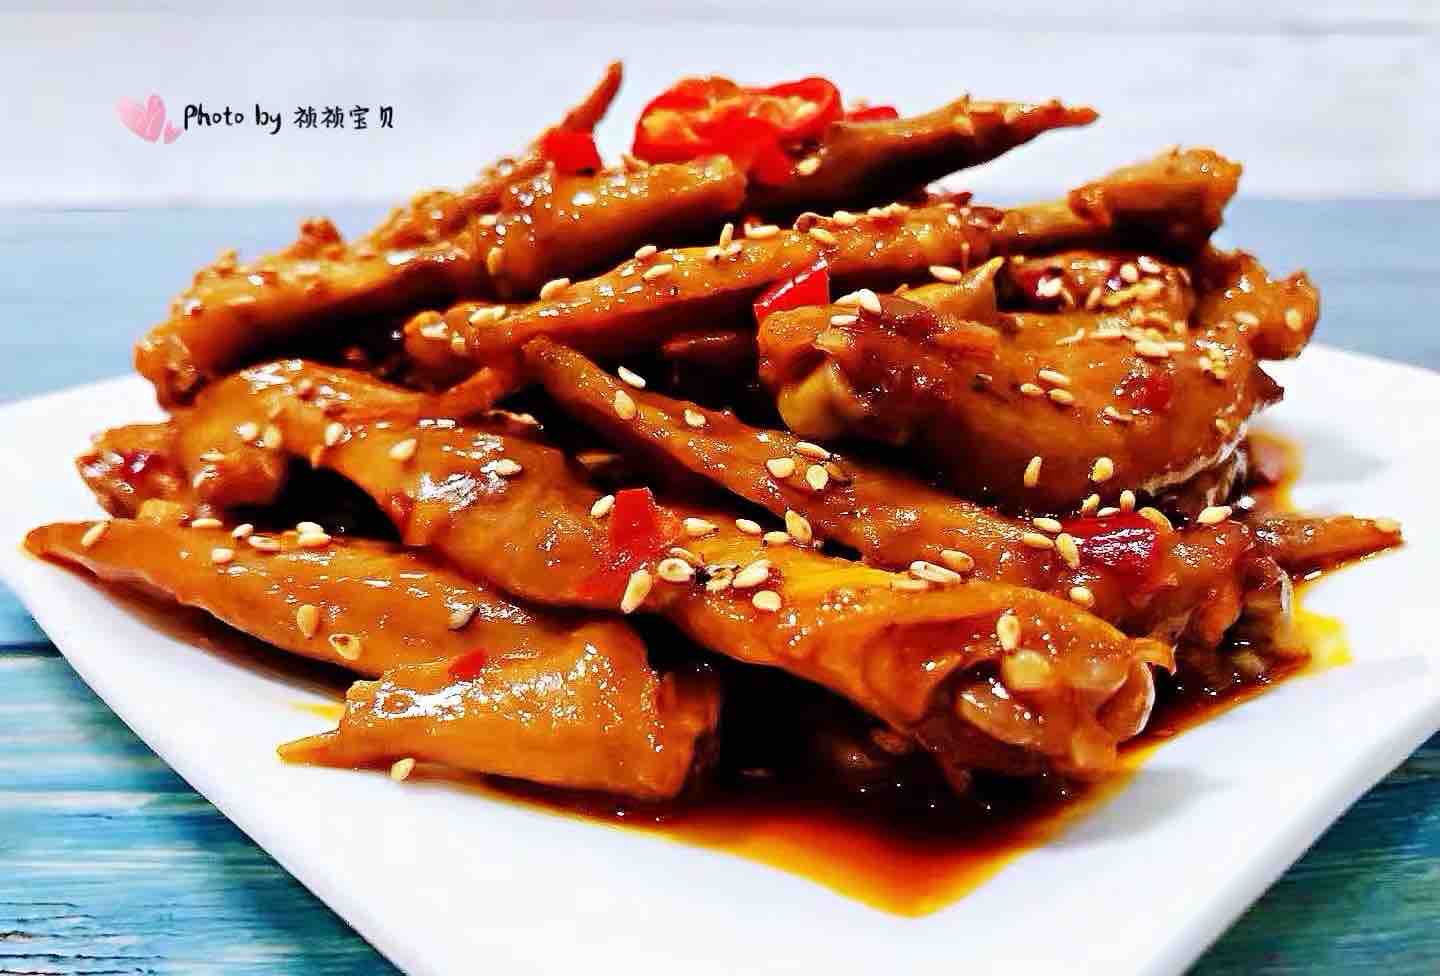 Spicy Chicken Wing Tips recipe